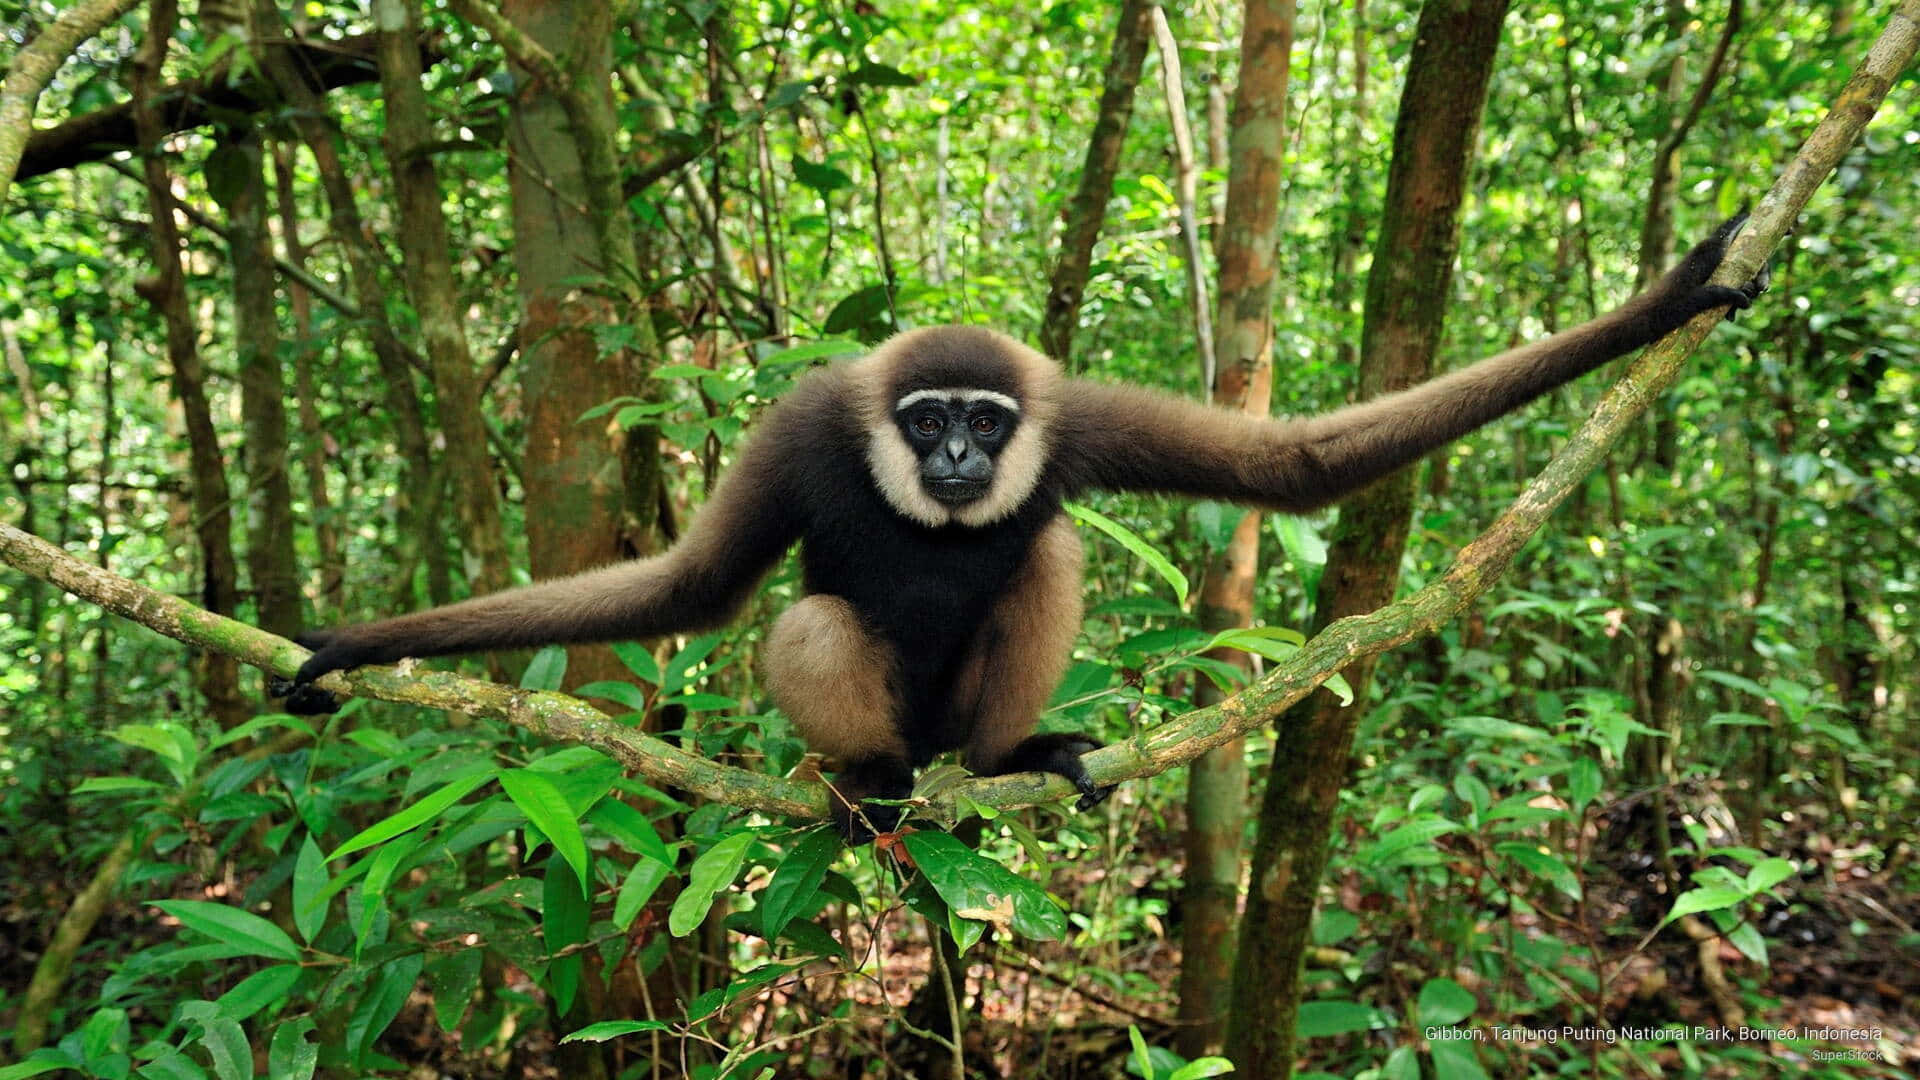 Athletic male gibbon hanging from a tree branch in a natural forest environment